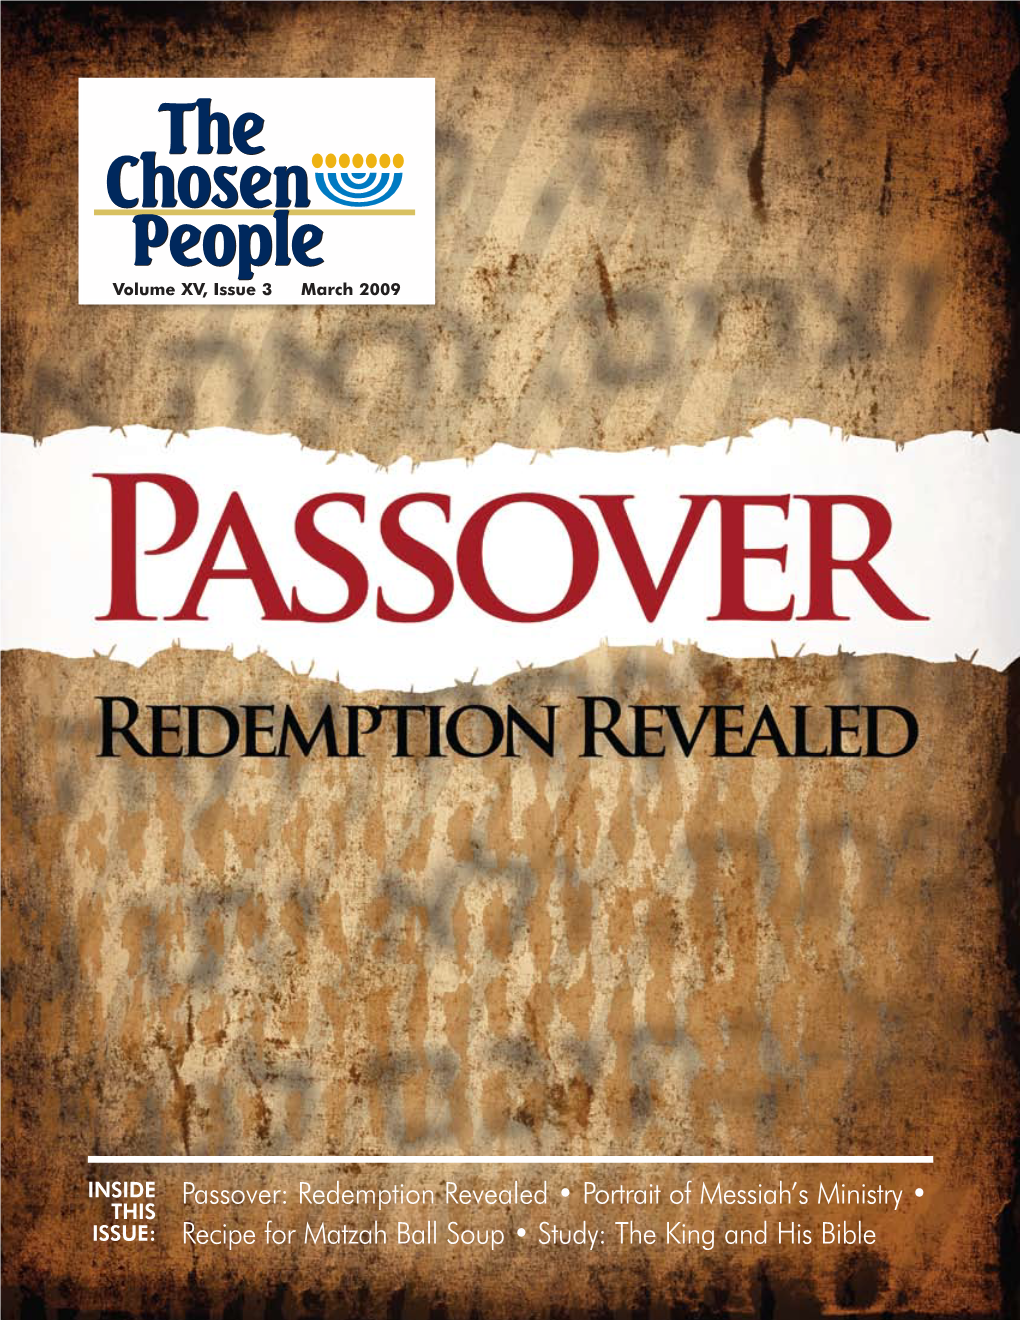 Passover: Redemption Revealed • Portrait of Messiah’S Ministry • THIS ISSUE: Recipe for Matzah Ball Soup • Study: the King and His Bible PASSOVER Redemption Revealed